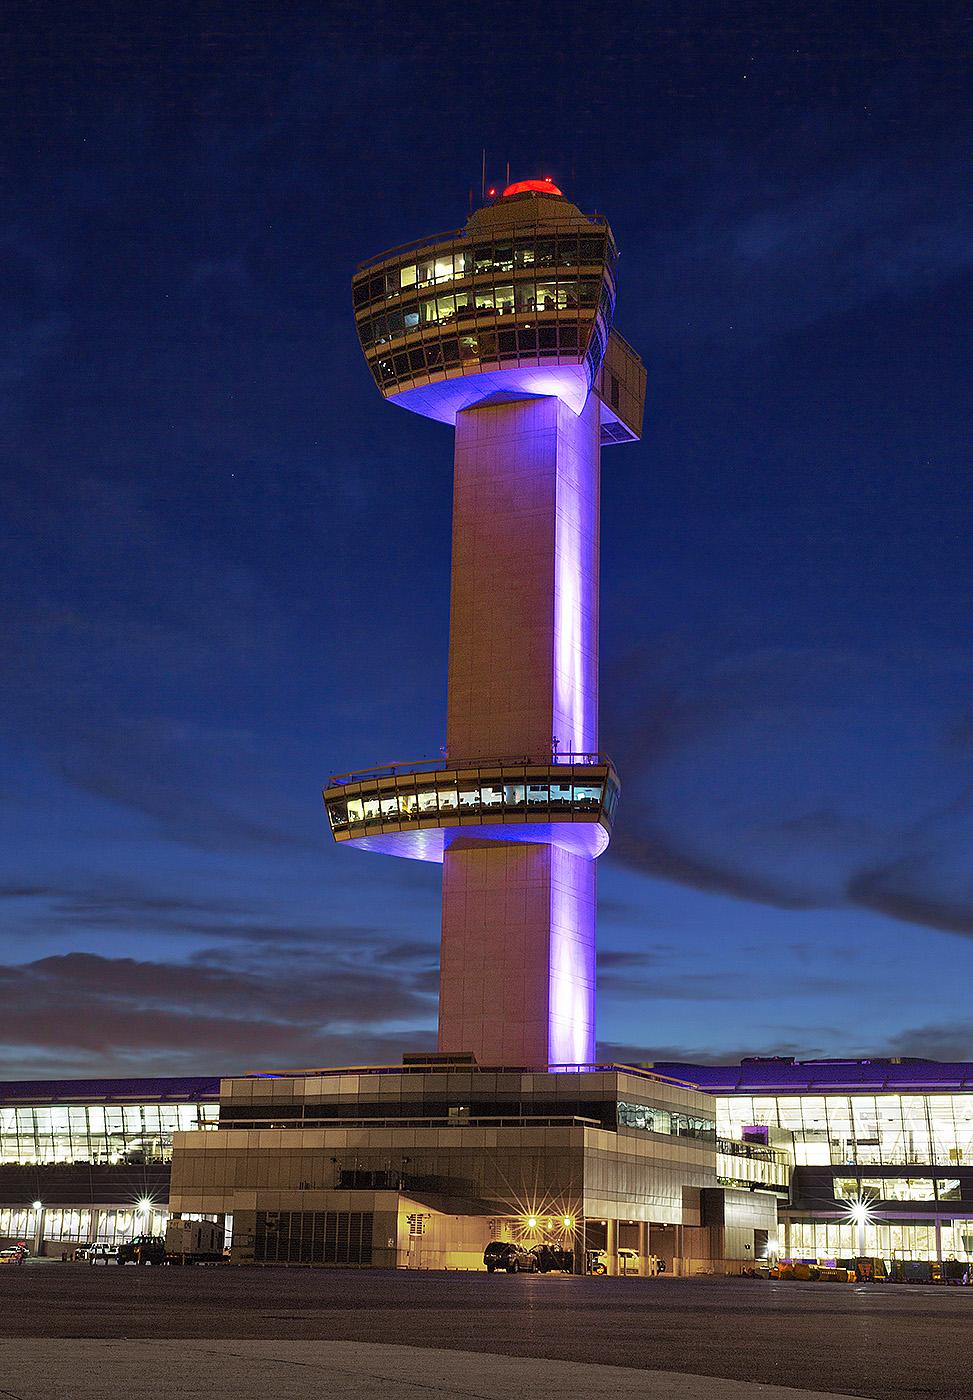 In Pictures: A Look At New York JFK Tower, Inside And Out | Aviation